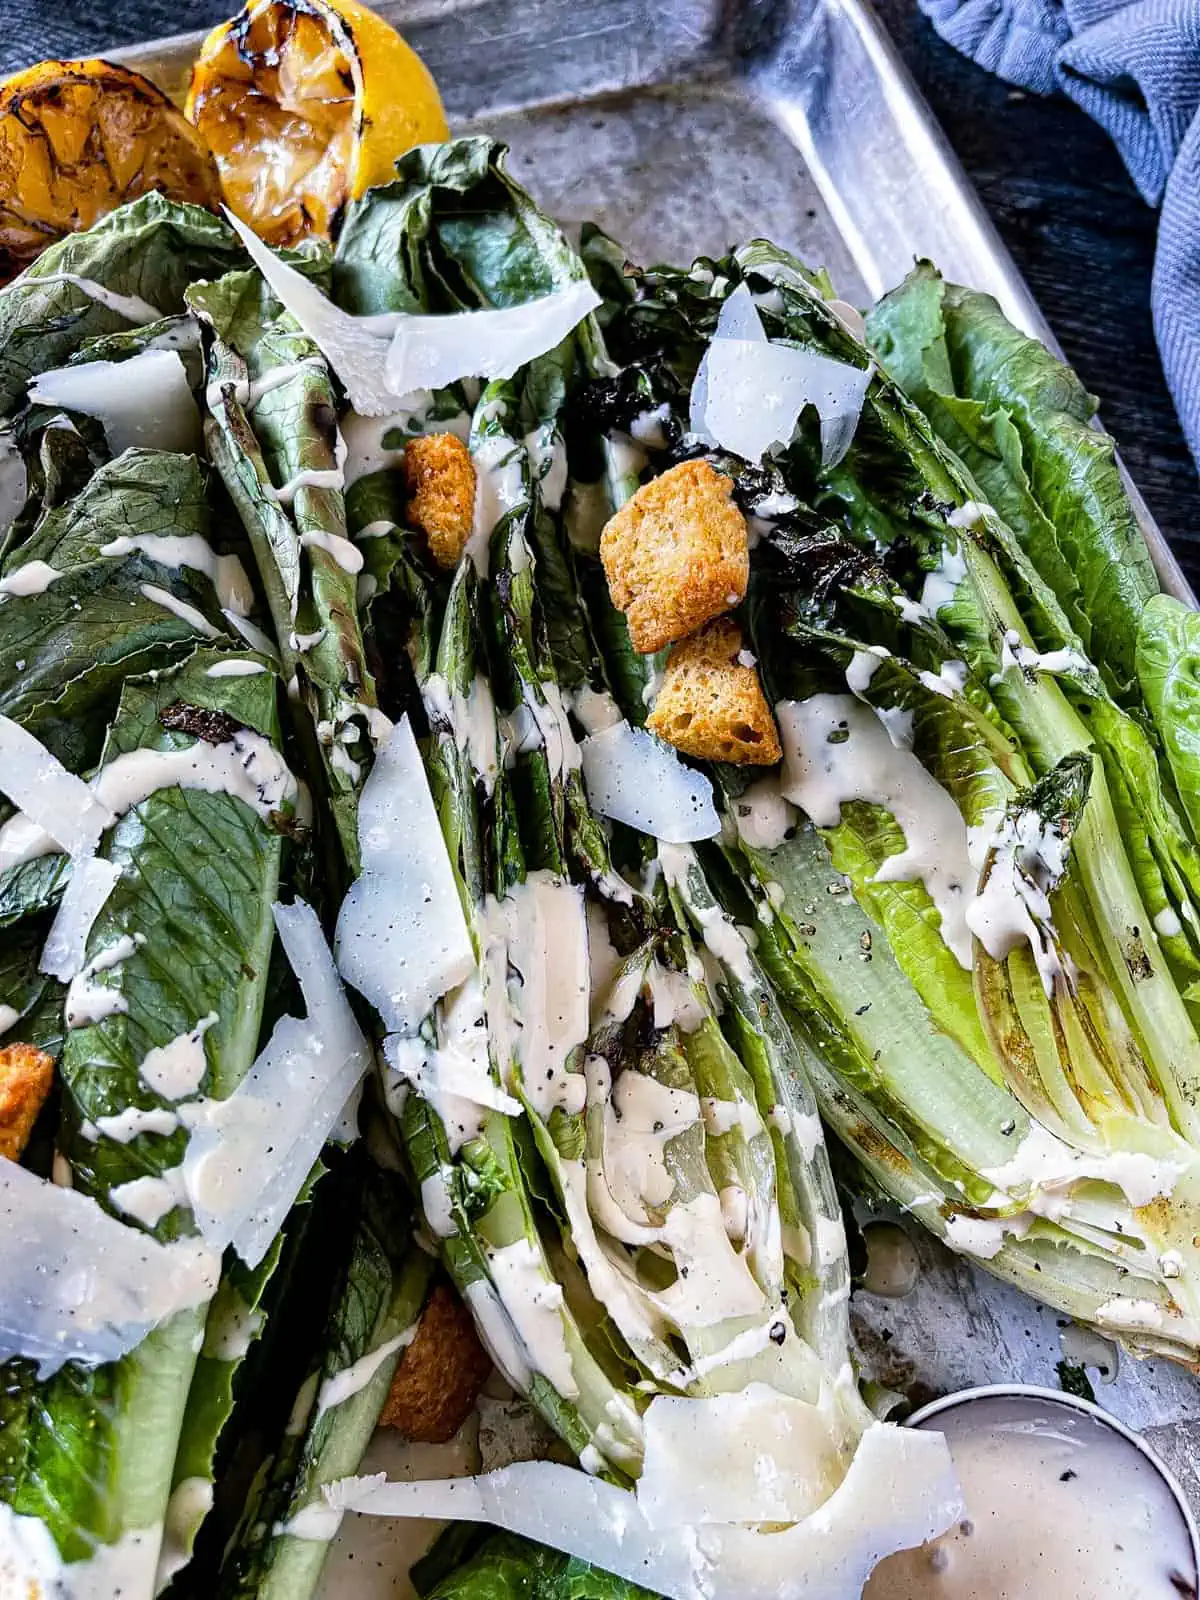 Grilled caesar salad with parmesan shavings and croutons